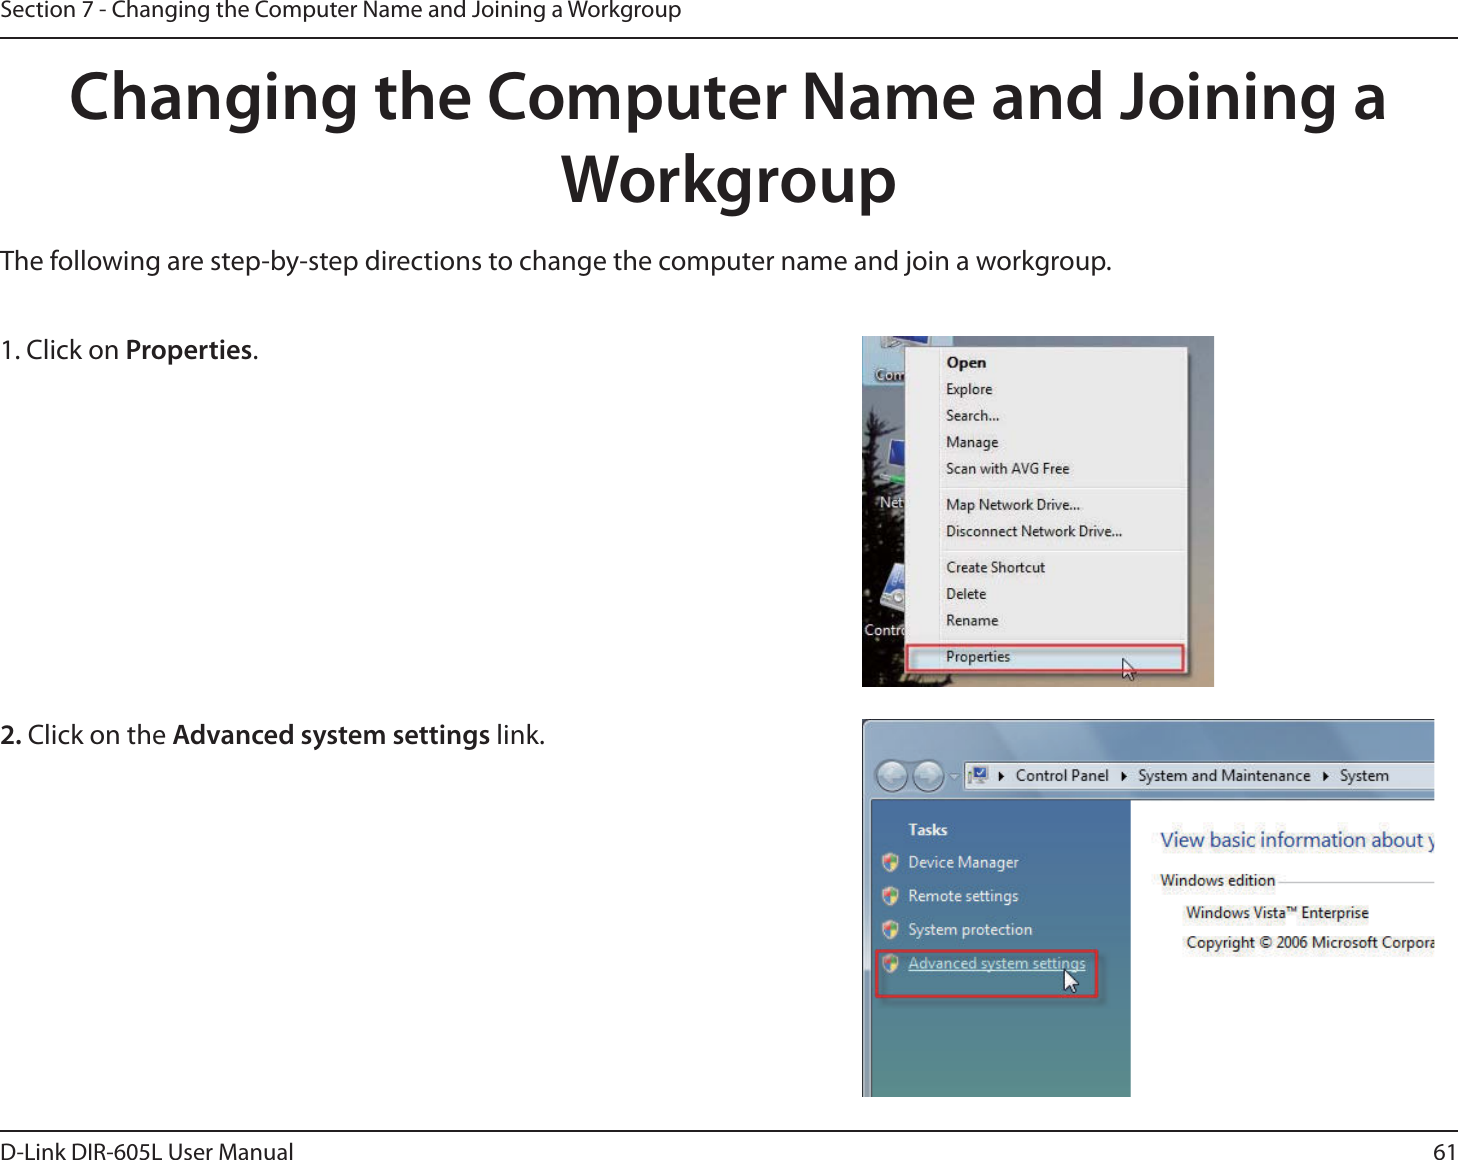 61D-Link DIR-605L User ManualSection 7 - Changing the Computer Name and Joining a WorkgroupChanging the Computer Name and Joining a WorkgroupThe following are step-by-step directions to change the computer name and join a workgroup.      2. Click on the Advanced system settings link. 1. Click on Properties.     